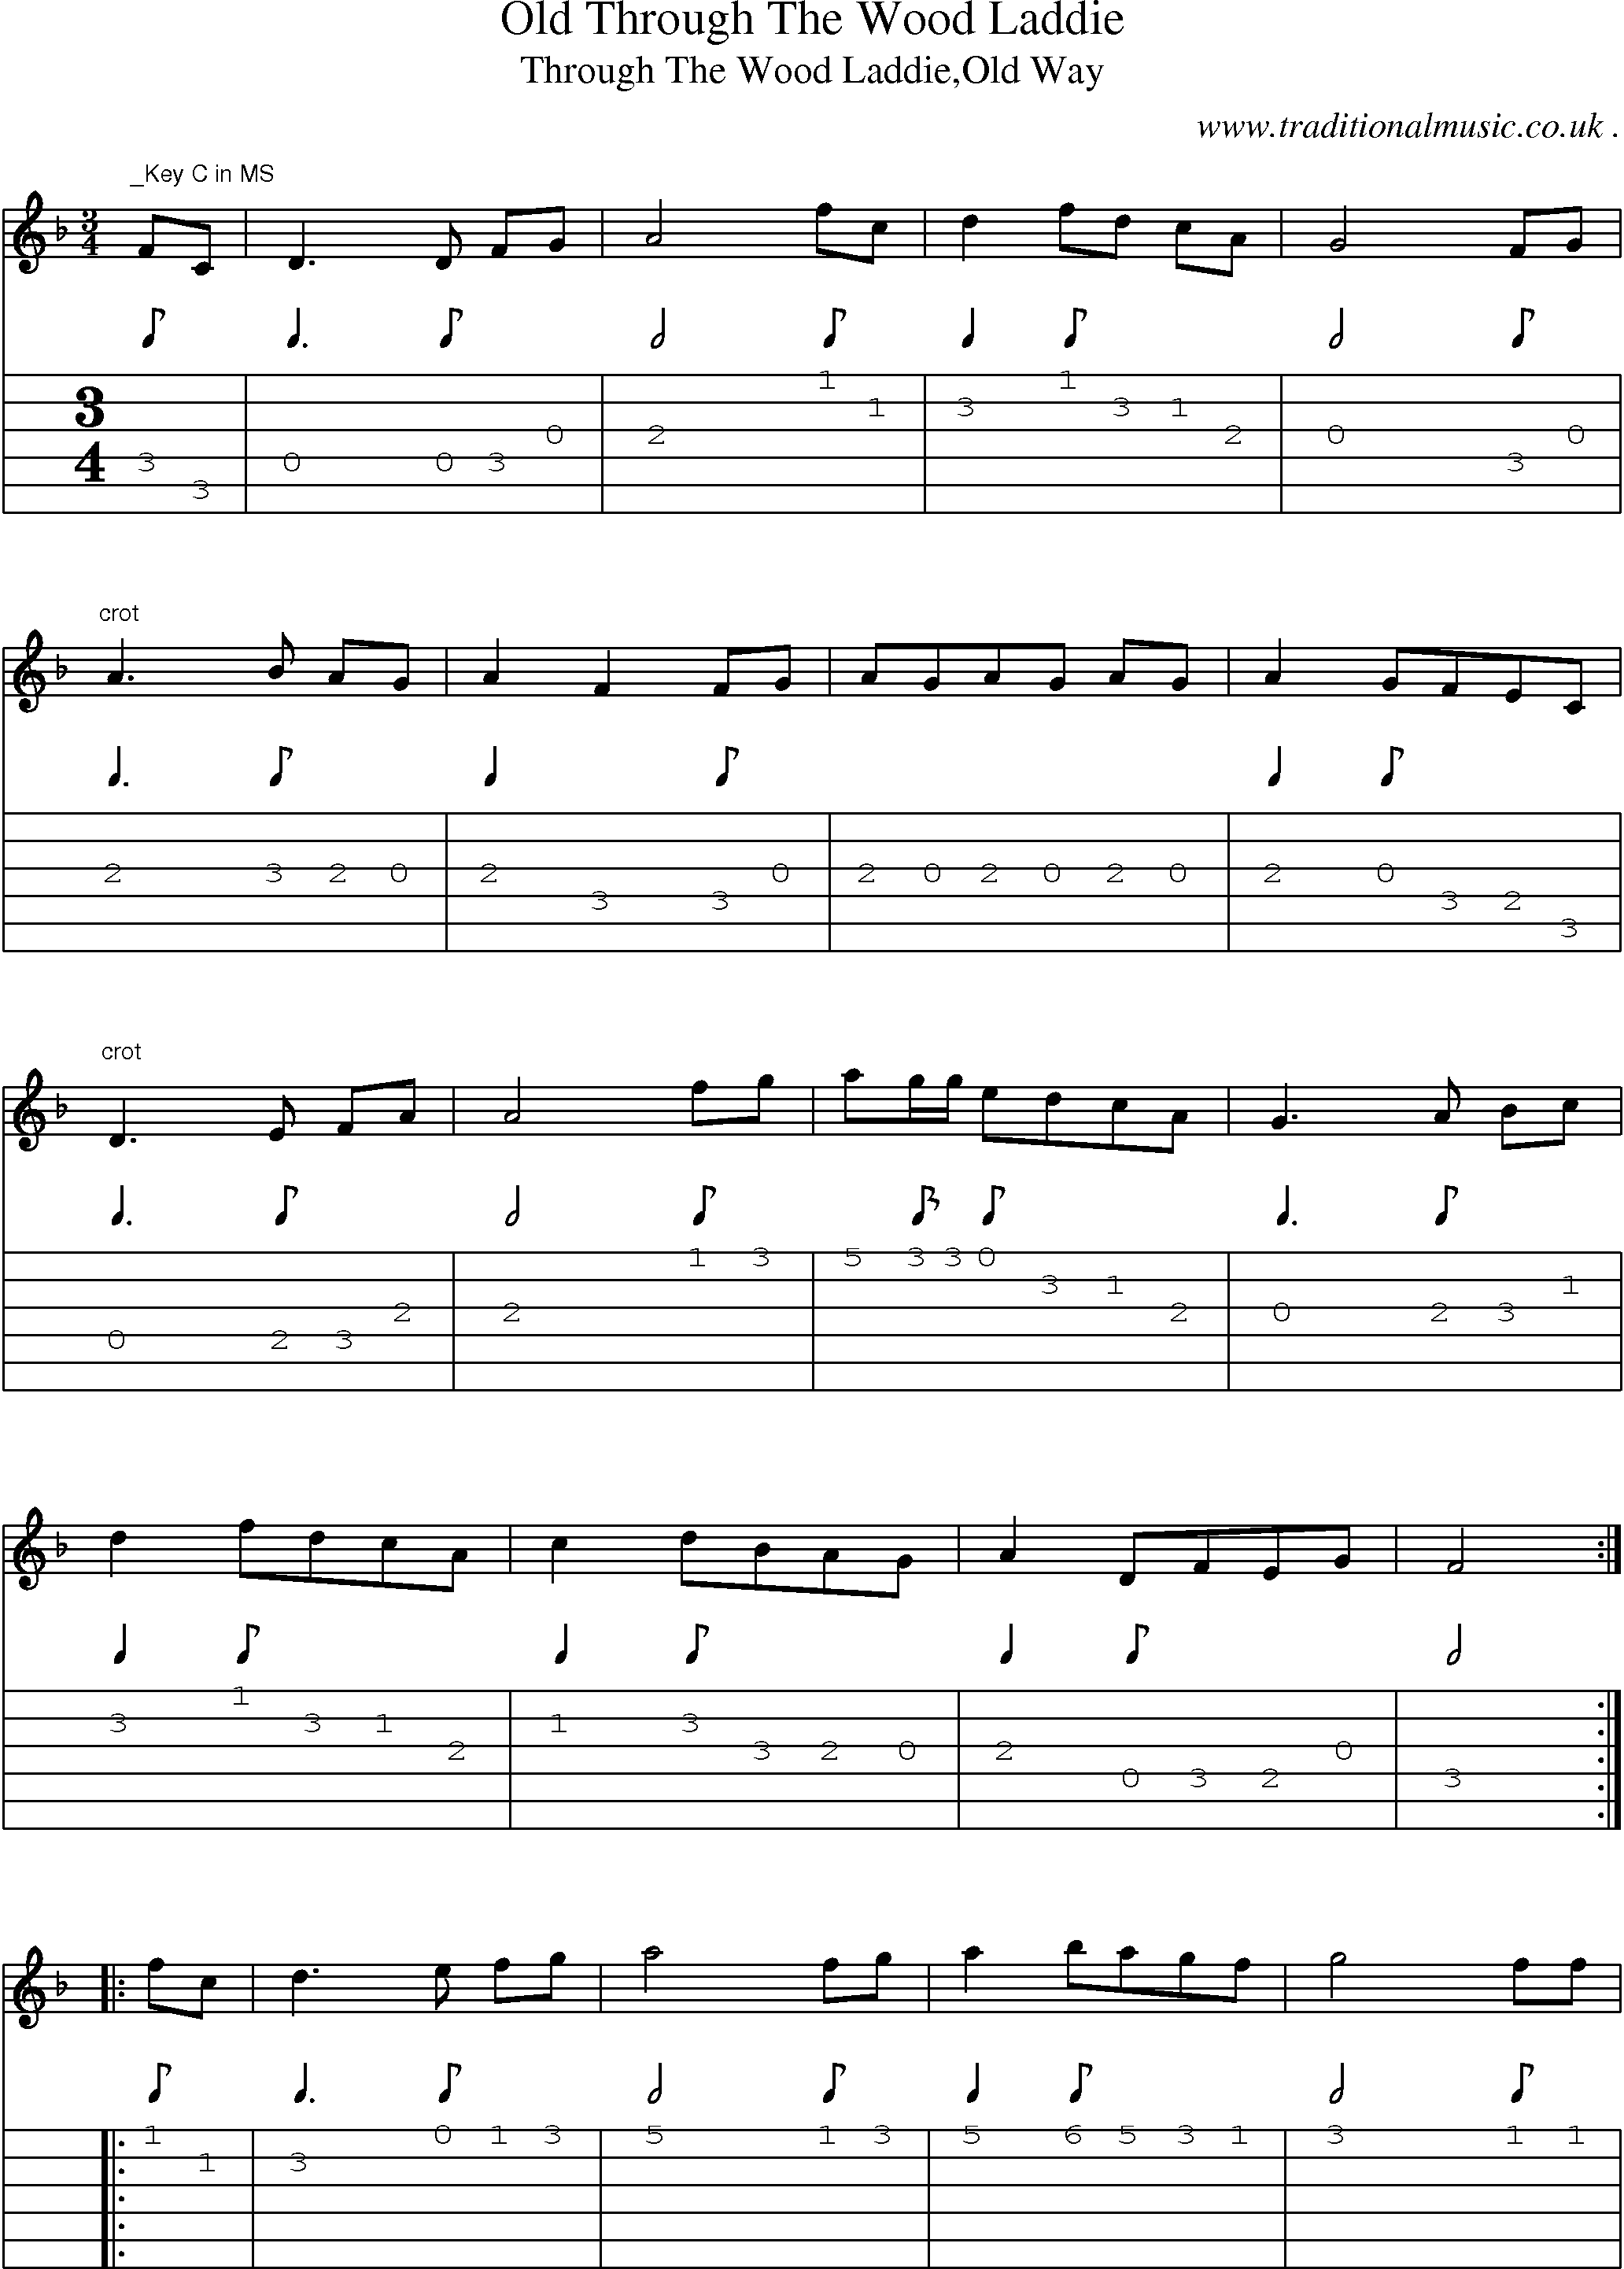 Sheet-Music and Guitar Tabs for Old Through The Wood Laddie